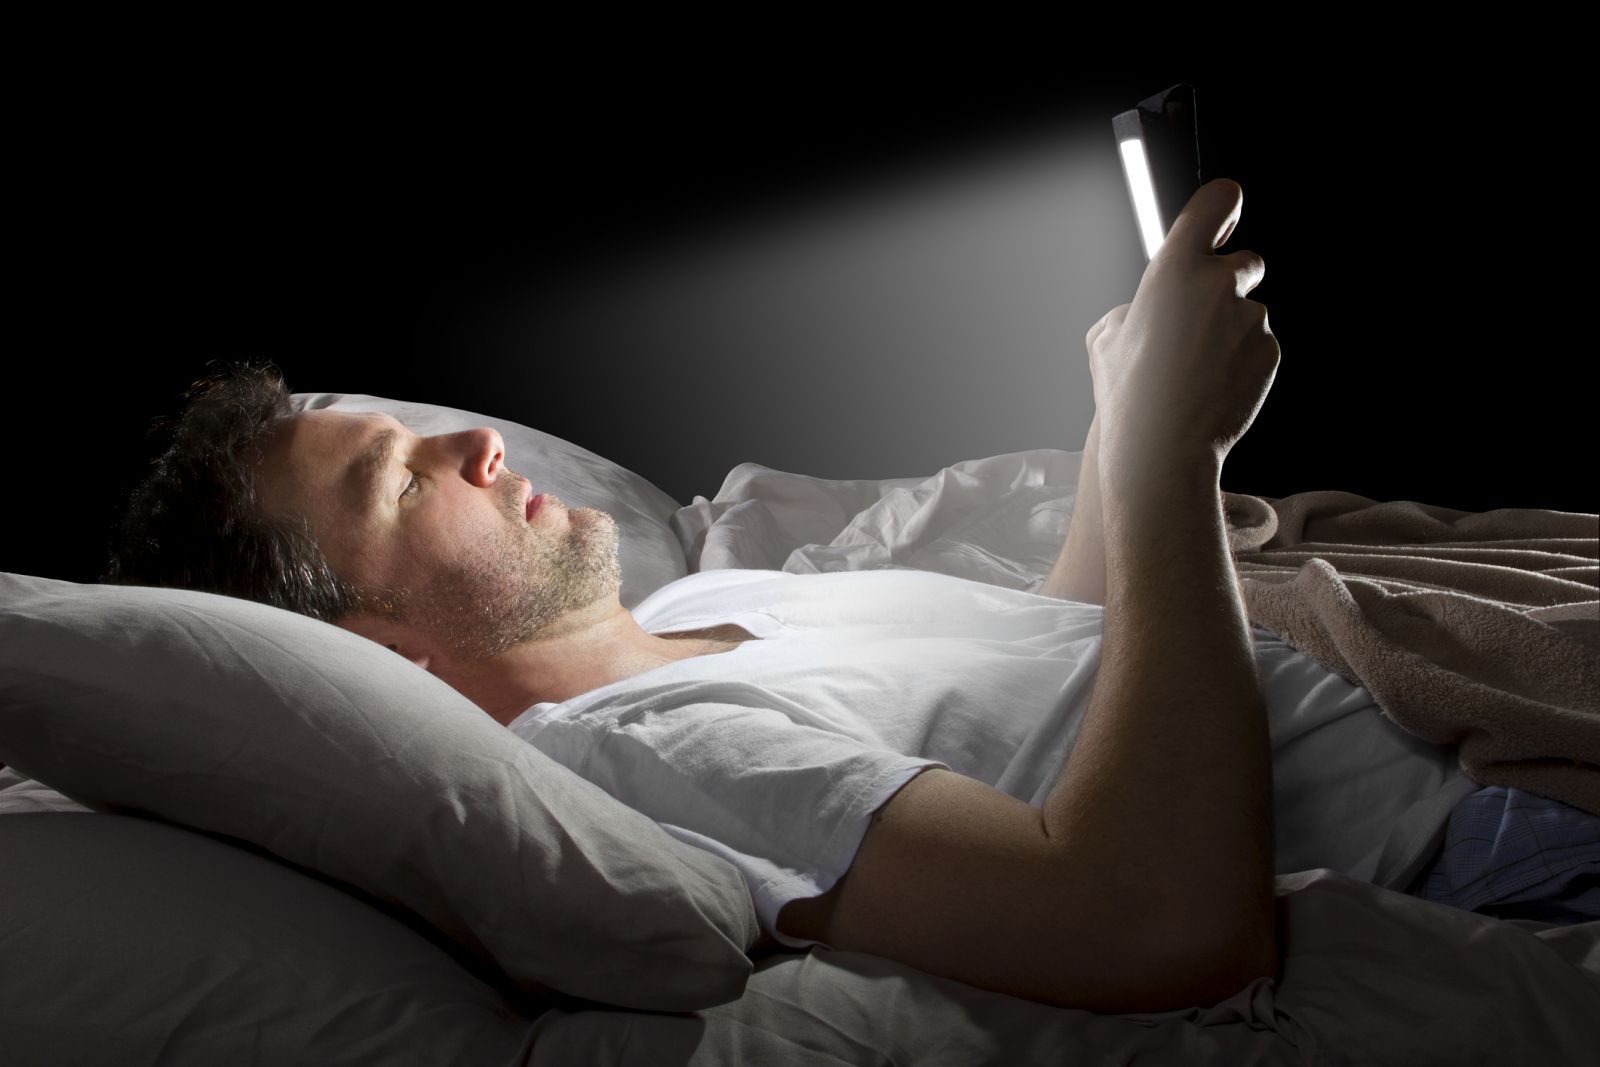 blue light, electronic, screen time, melatonin, cell phone use in bedroom